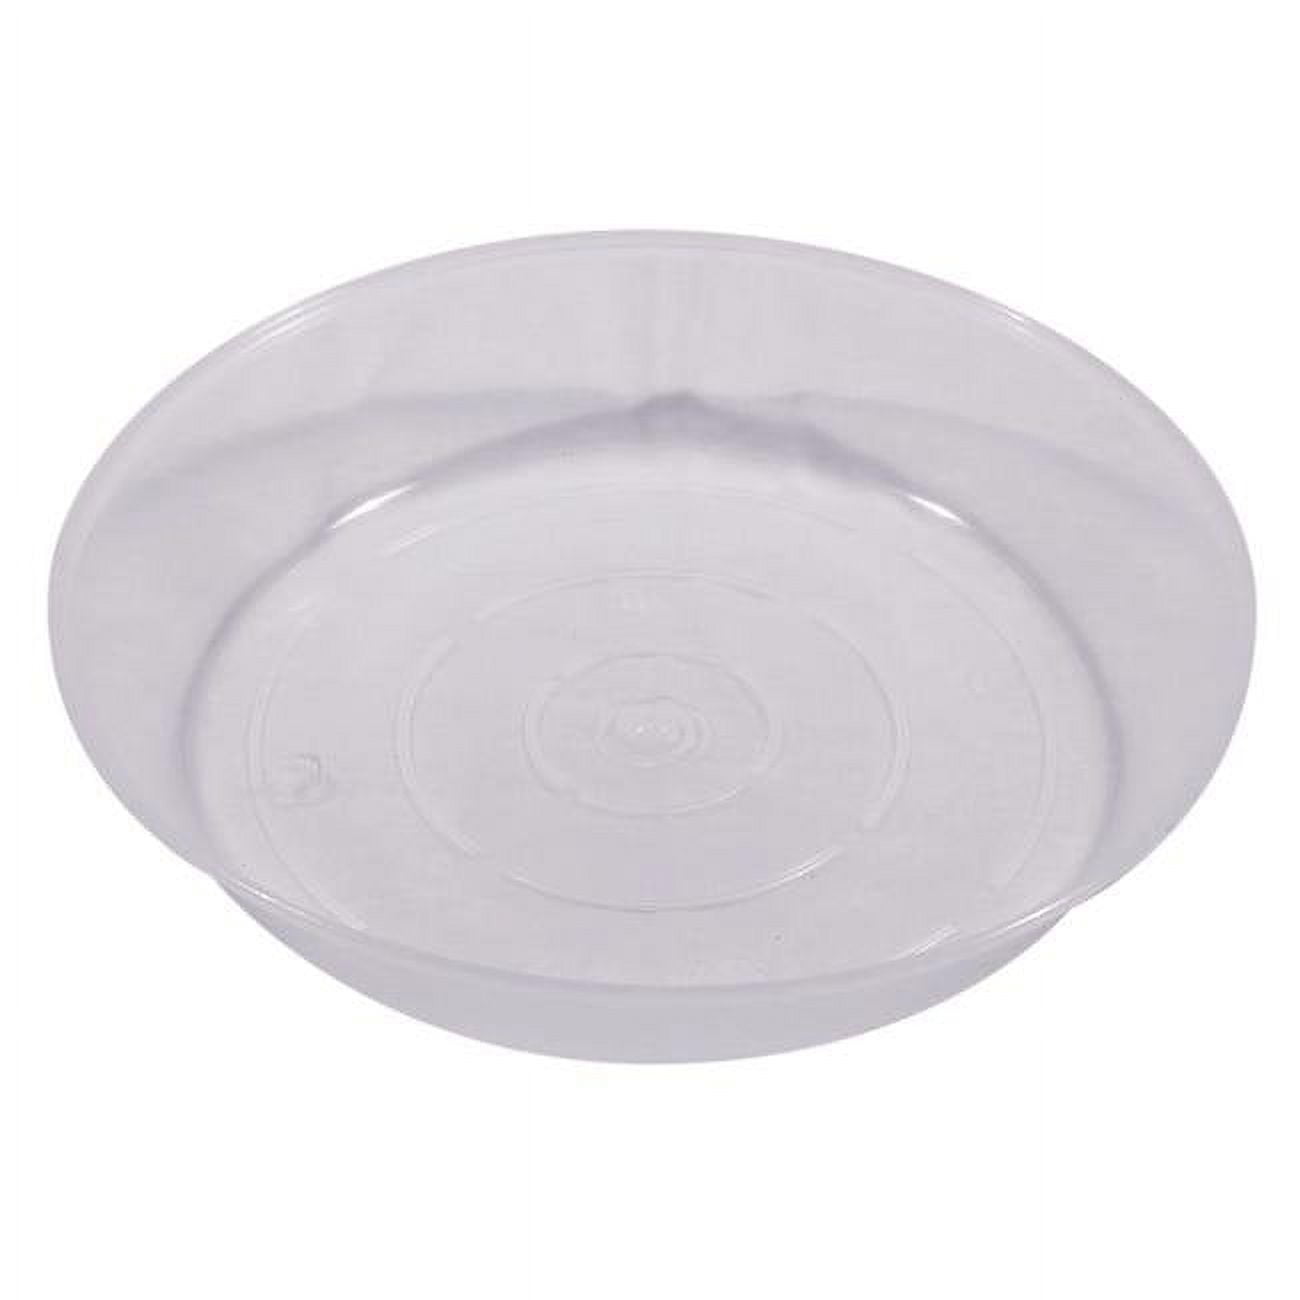 Picture of Austin Planter 8AS-N5pack 8 in. Clear Saucer - Pack of 5